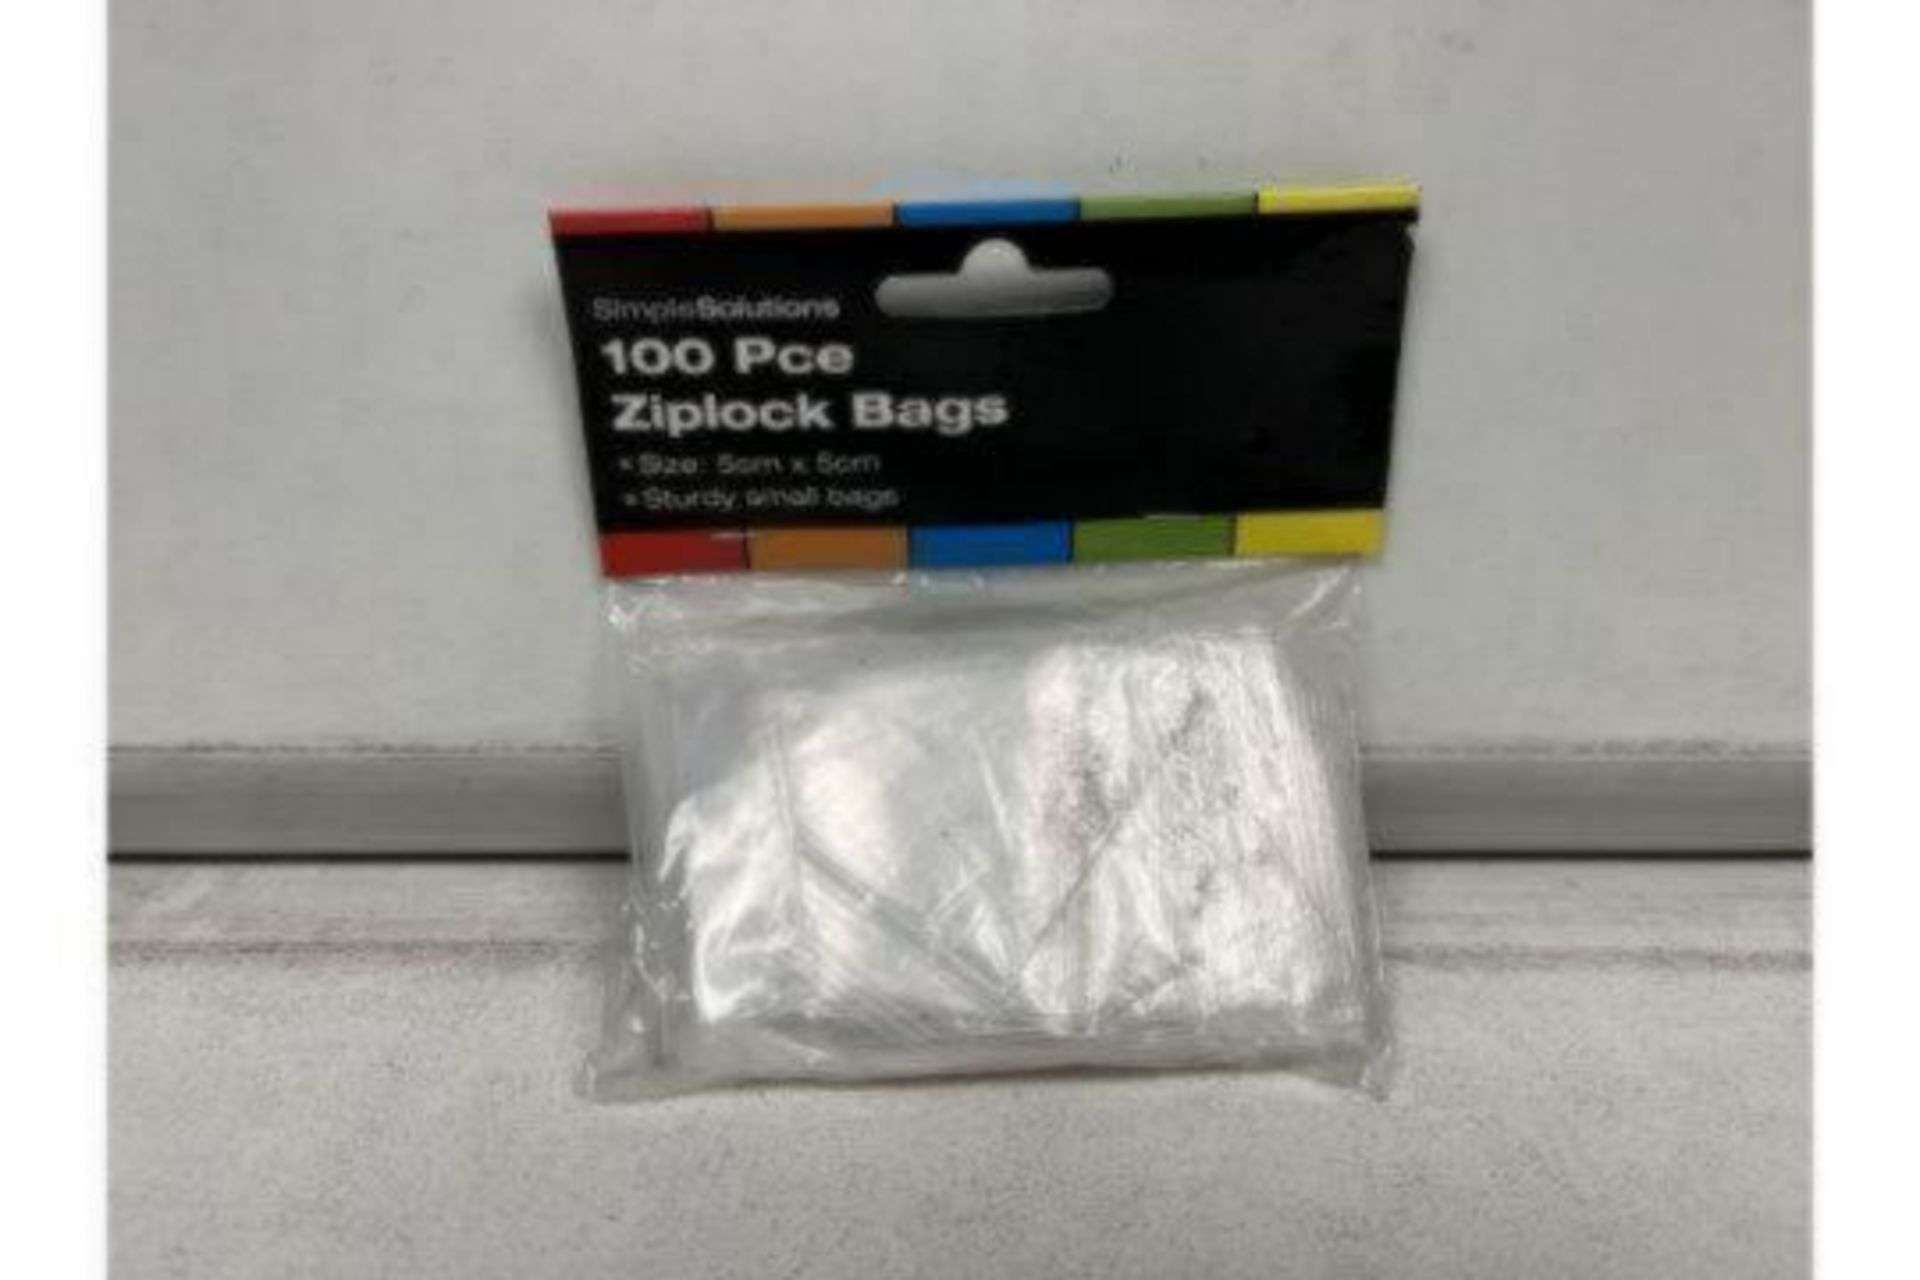 48 X NEW PACKAGED SIMPLE SOLUTIONS PACKS OF 100 ZIPLOCK BAGS. SIZE 5X5CM. STURDY DESIGN.